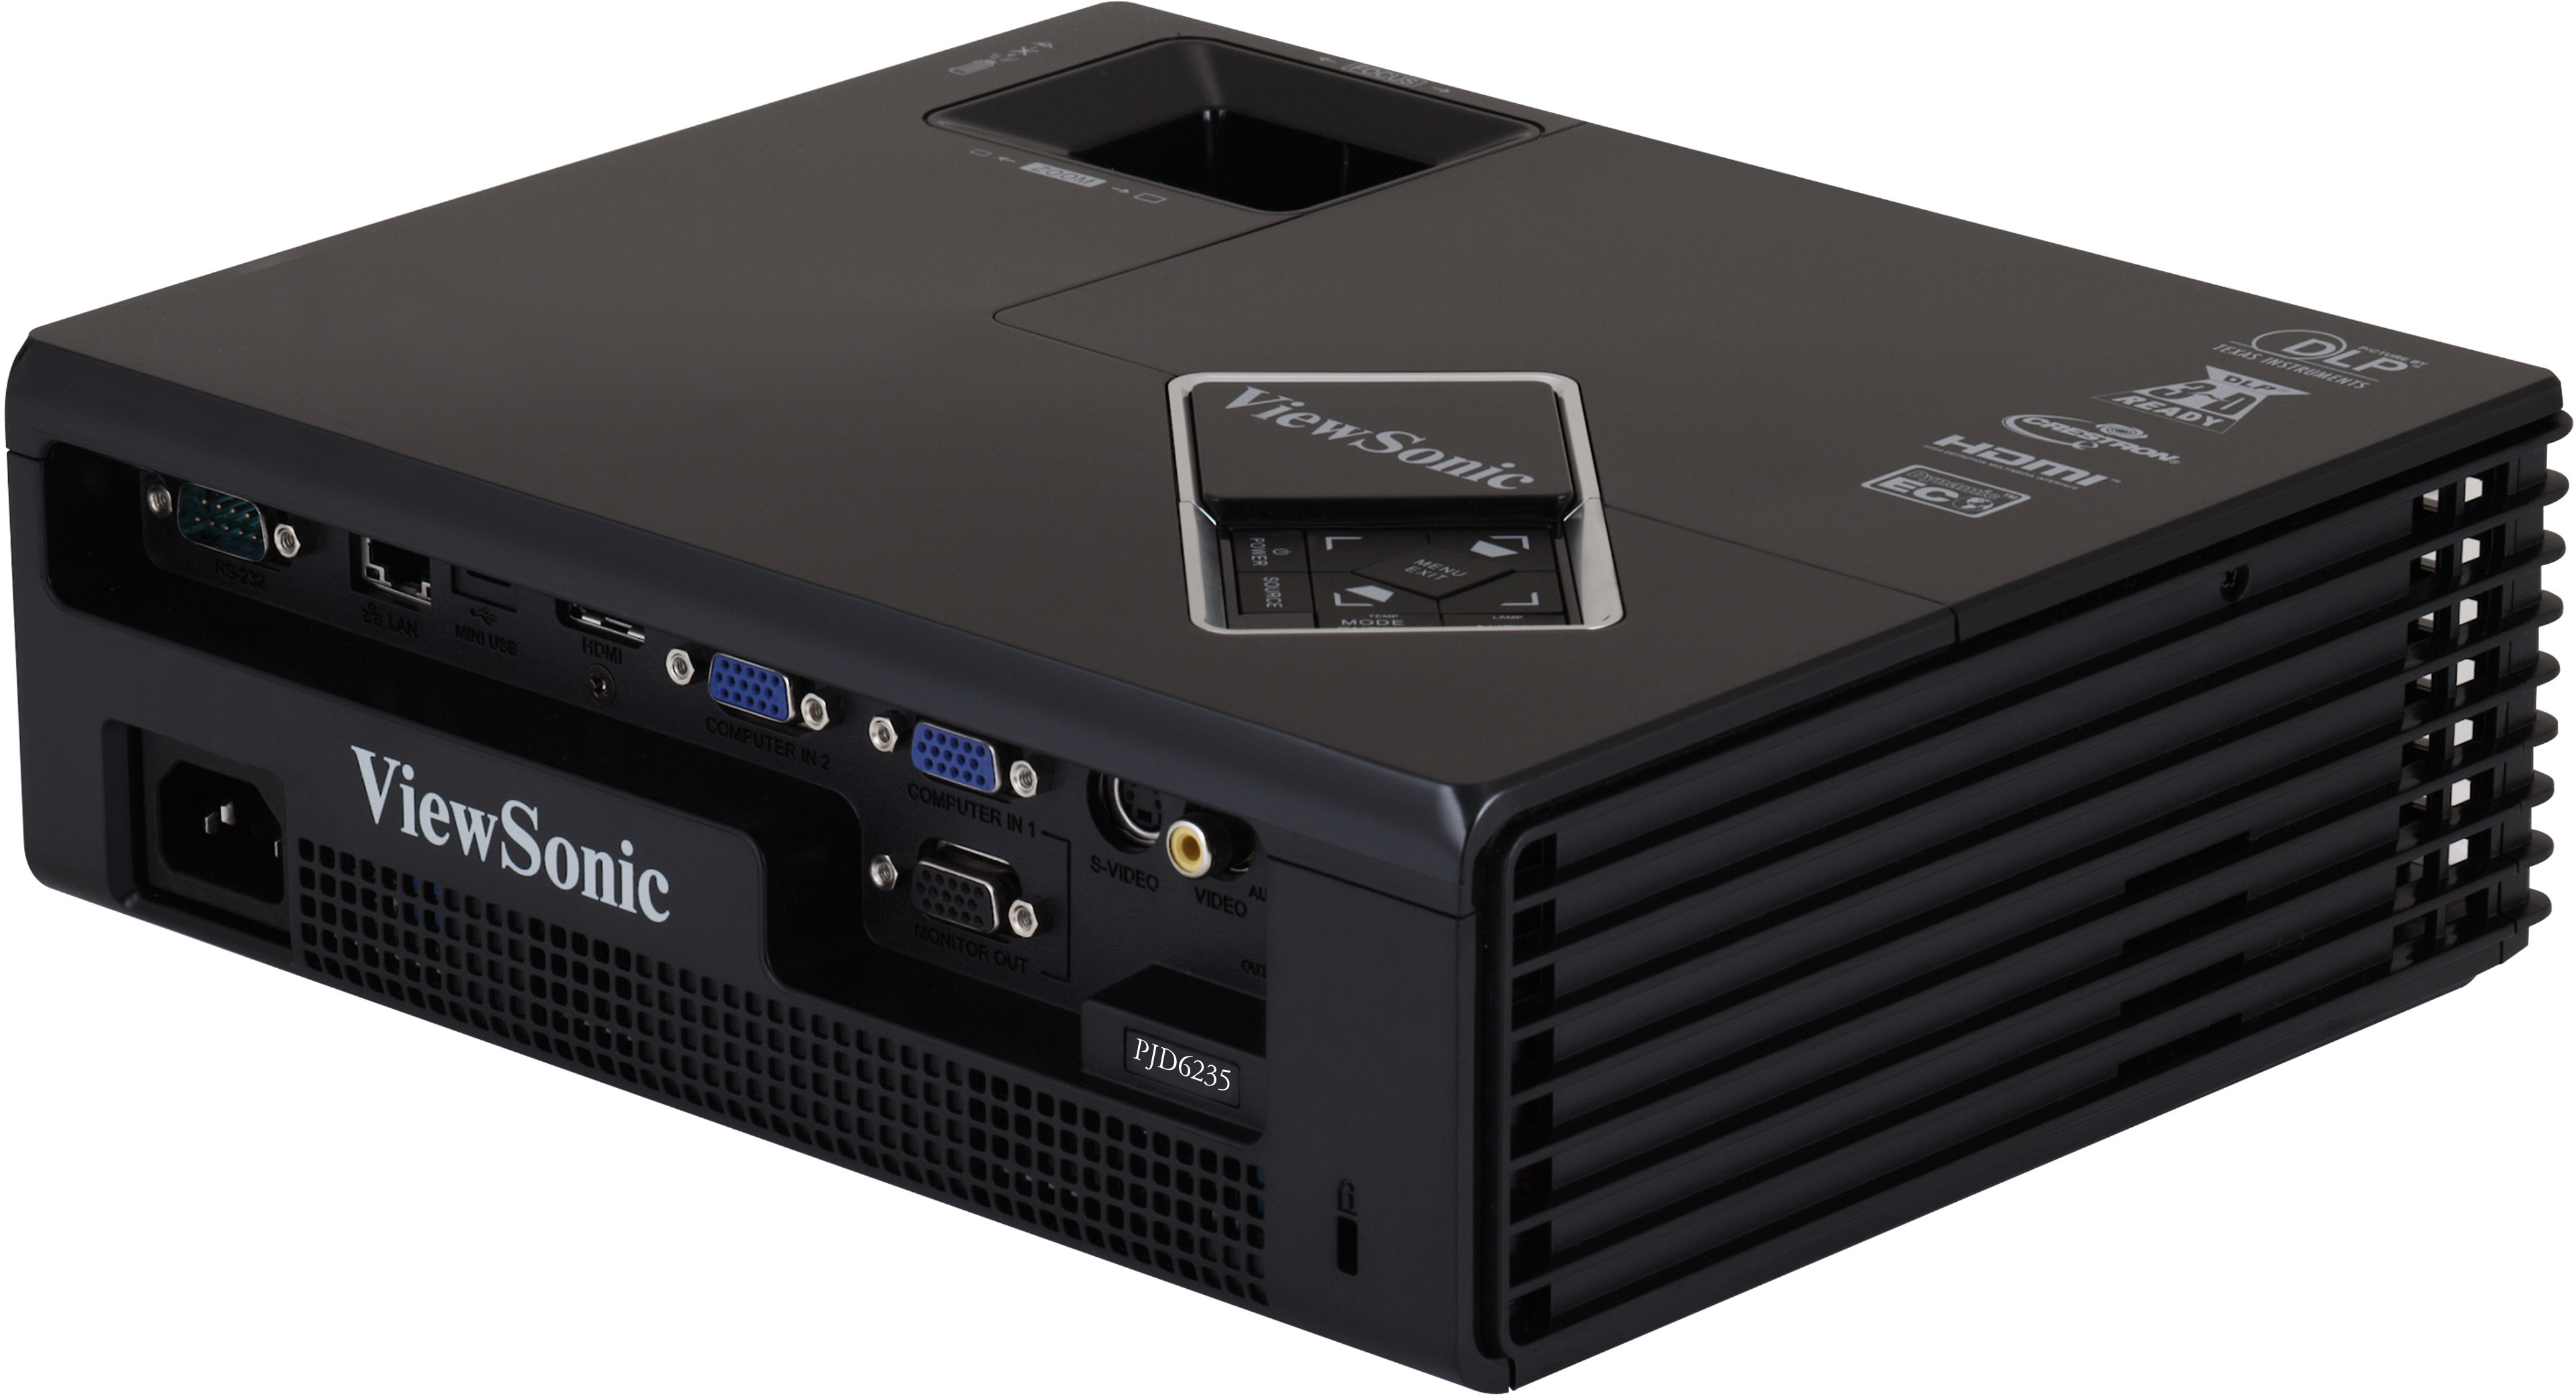 Viewsonic Pjd6235 Networkable Projector For More Efficient And Effective Management